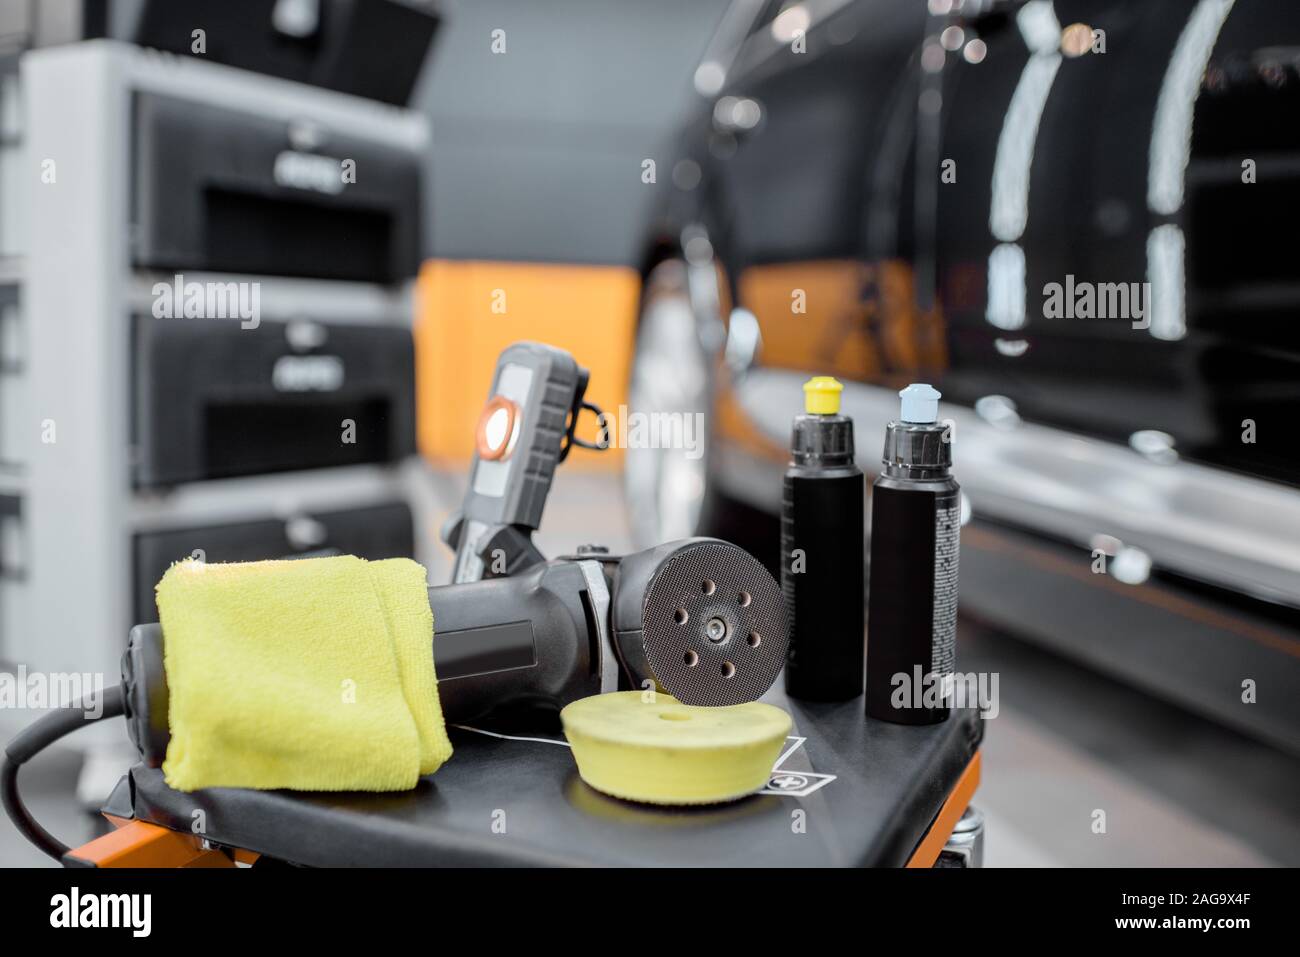 Car Detailing Tools  All the detailing hardware you need in one